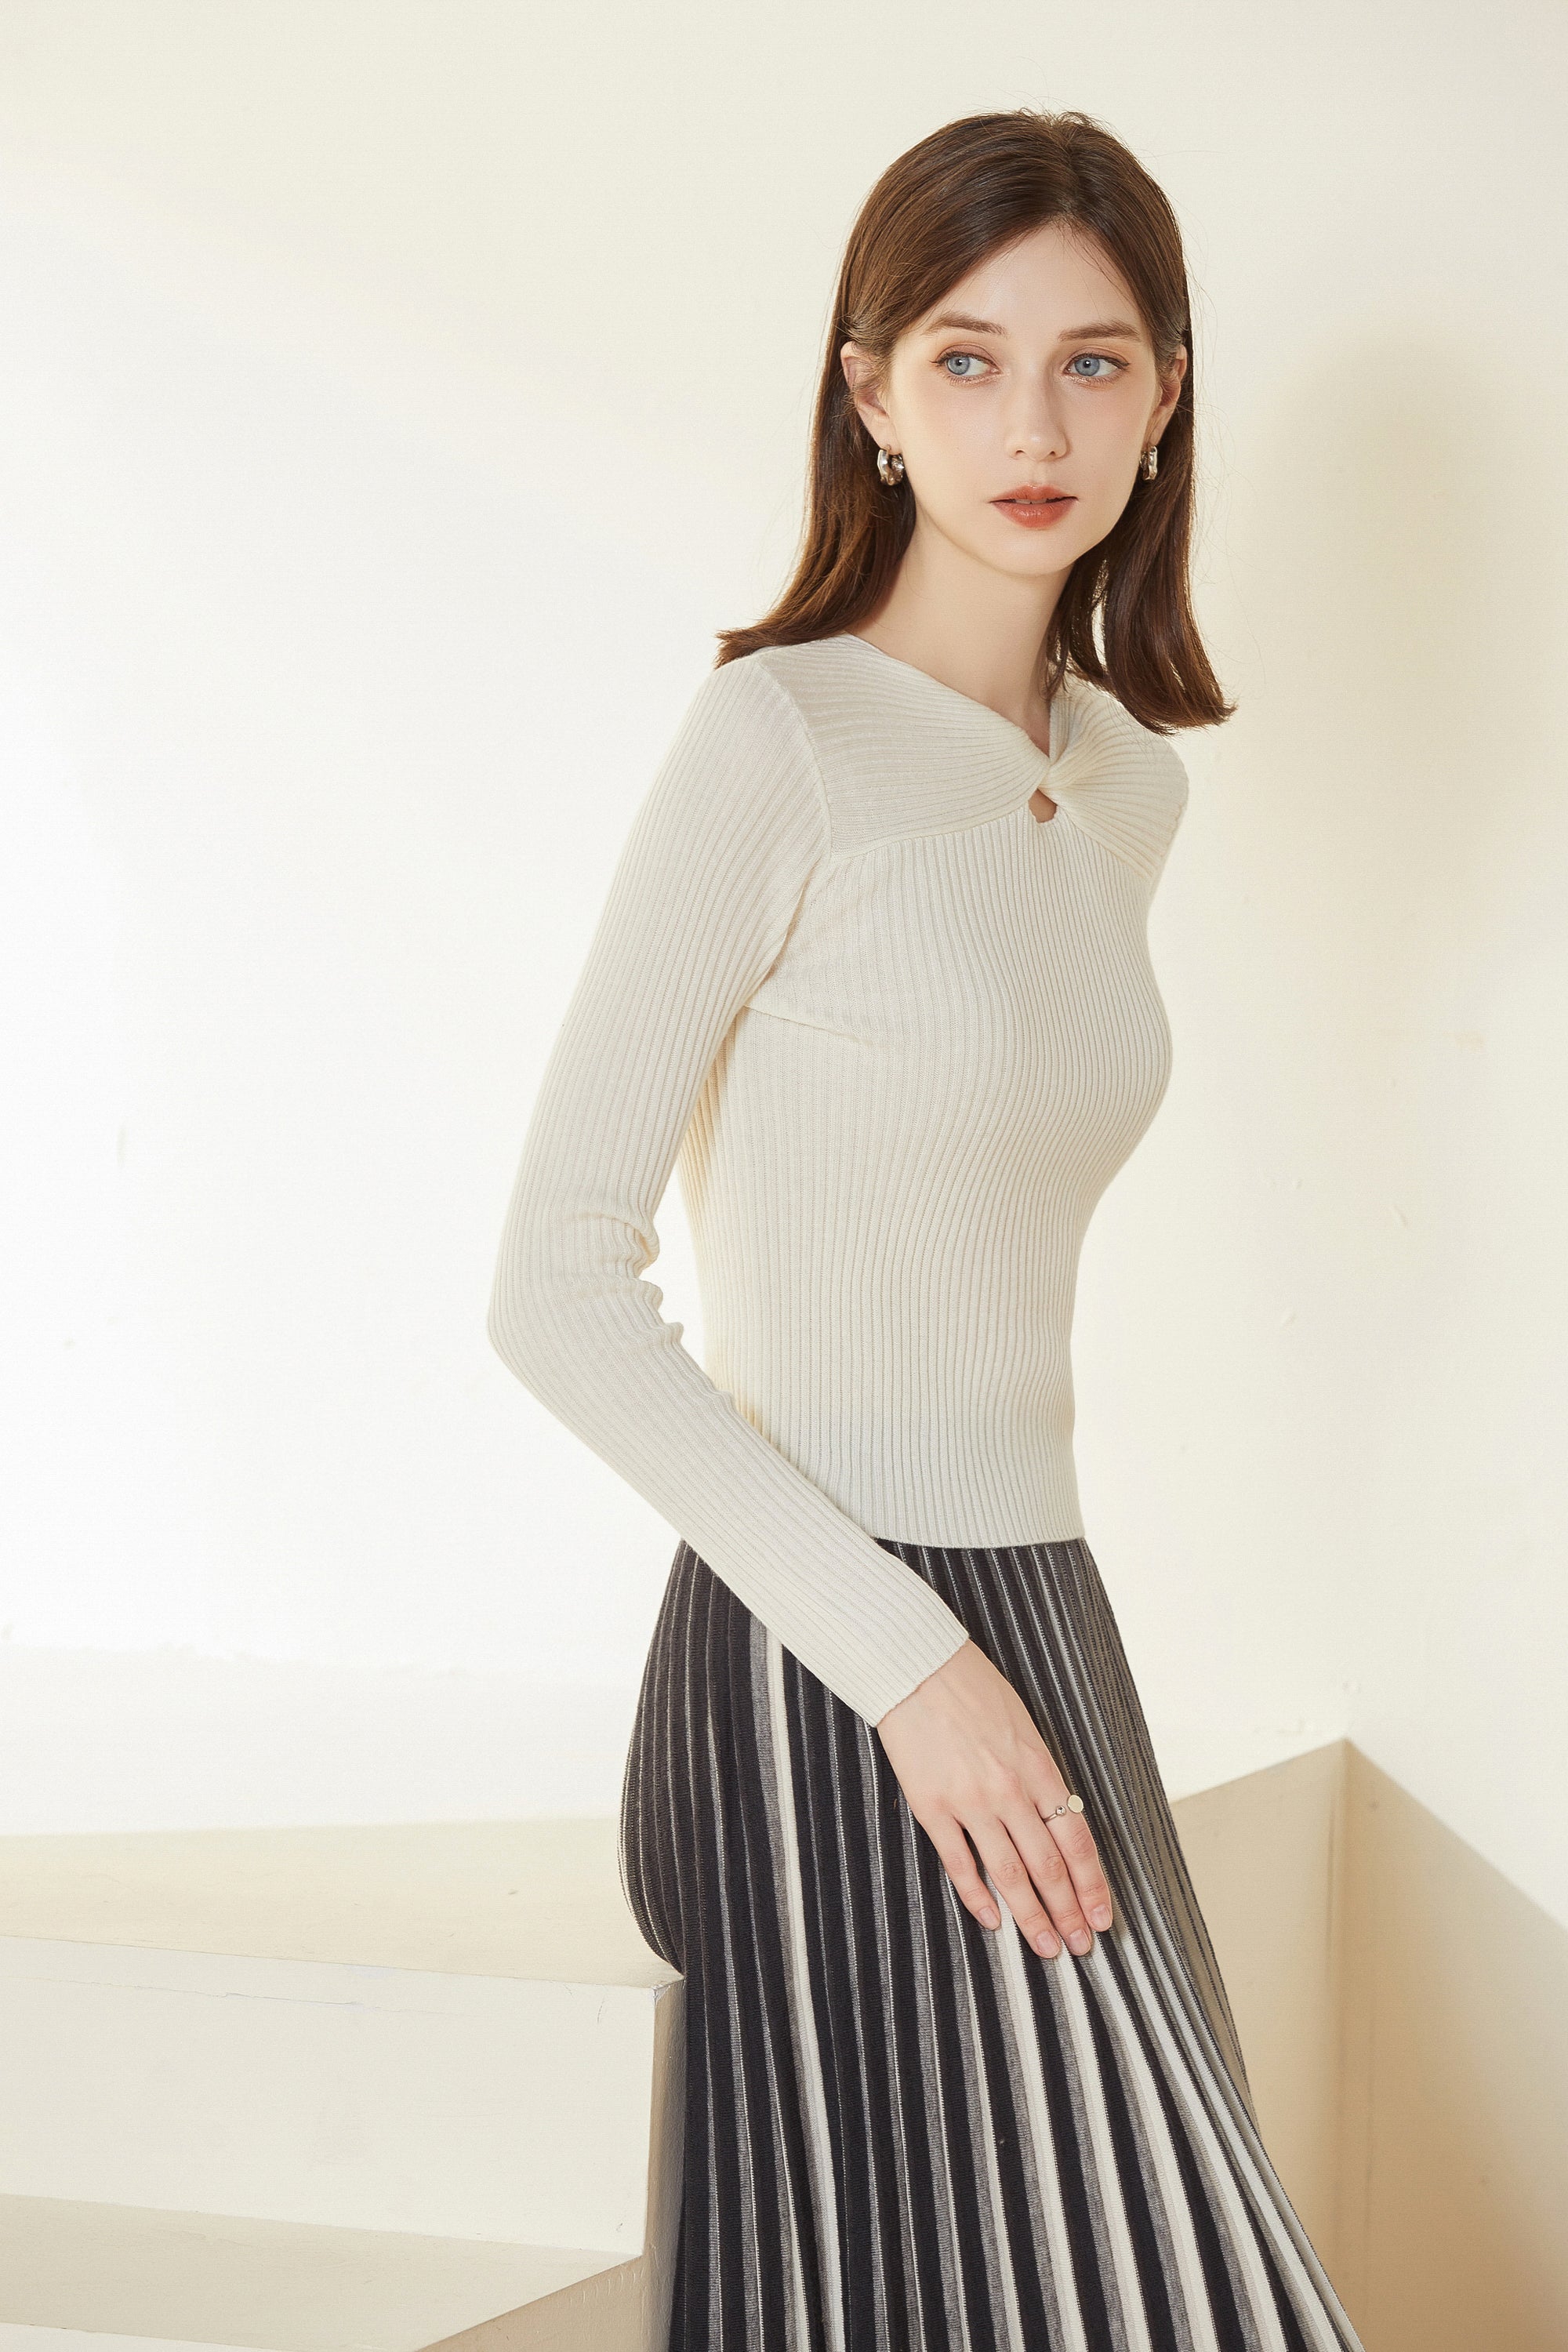 Sylphide | Dinah White Cut Out Wool Sweater